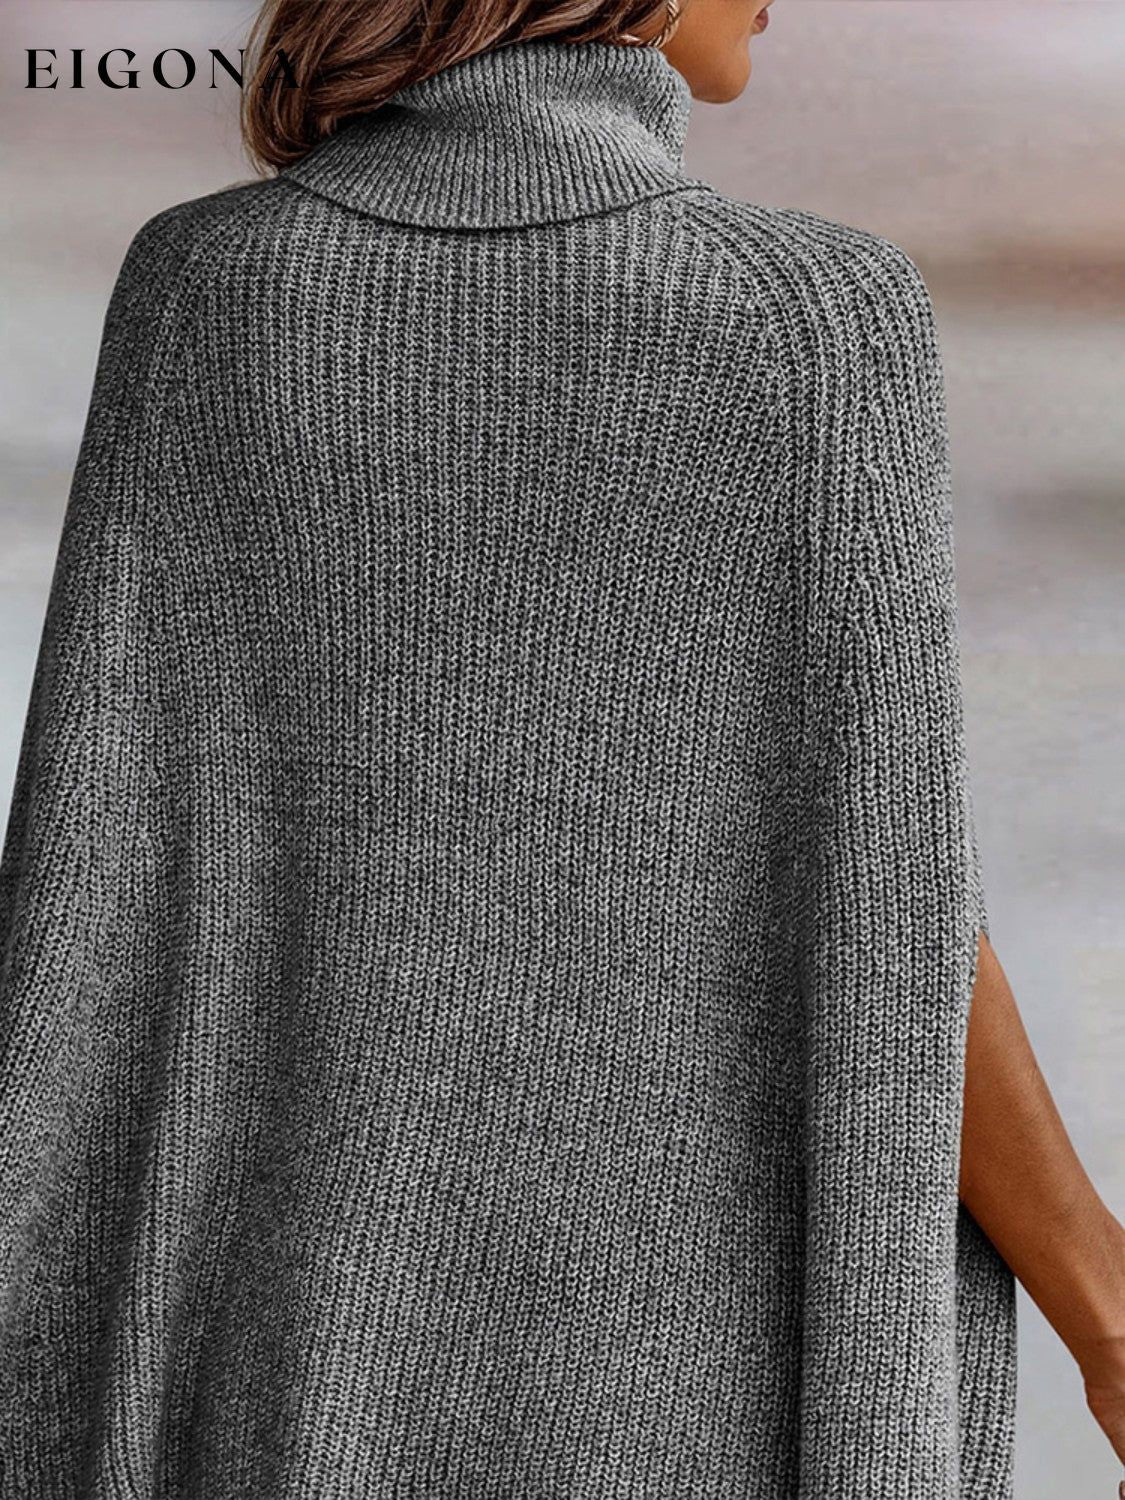 Turtleneck Dolman Sleeve Poncho Fashion Sweater clothes long sleeve Romantichut Ship From Overseas Shipping Delay 09/29/2023 - 10/04/2023 Sweater sweaters turtleneck